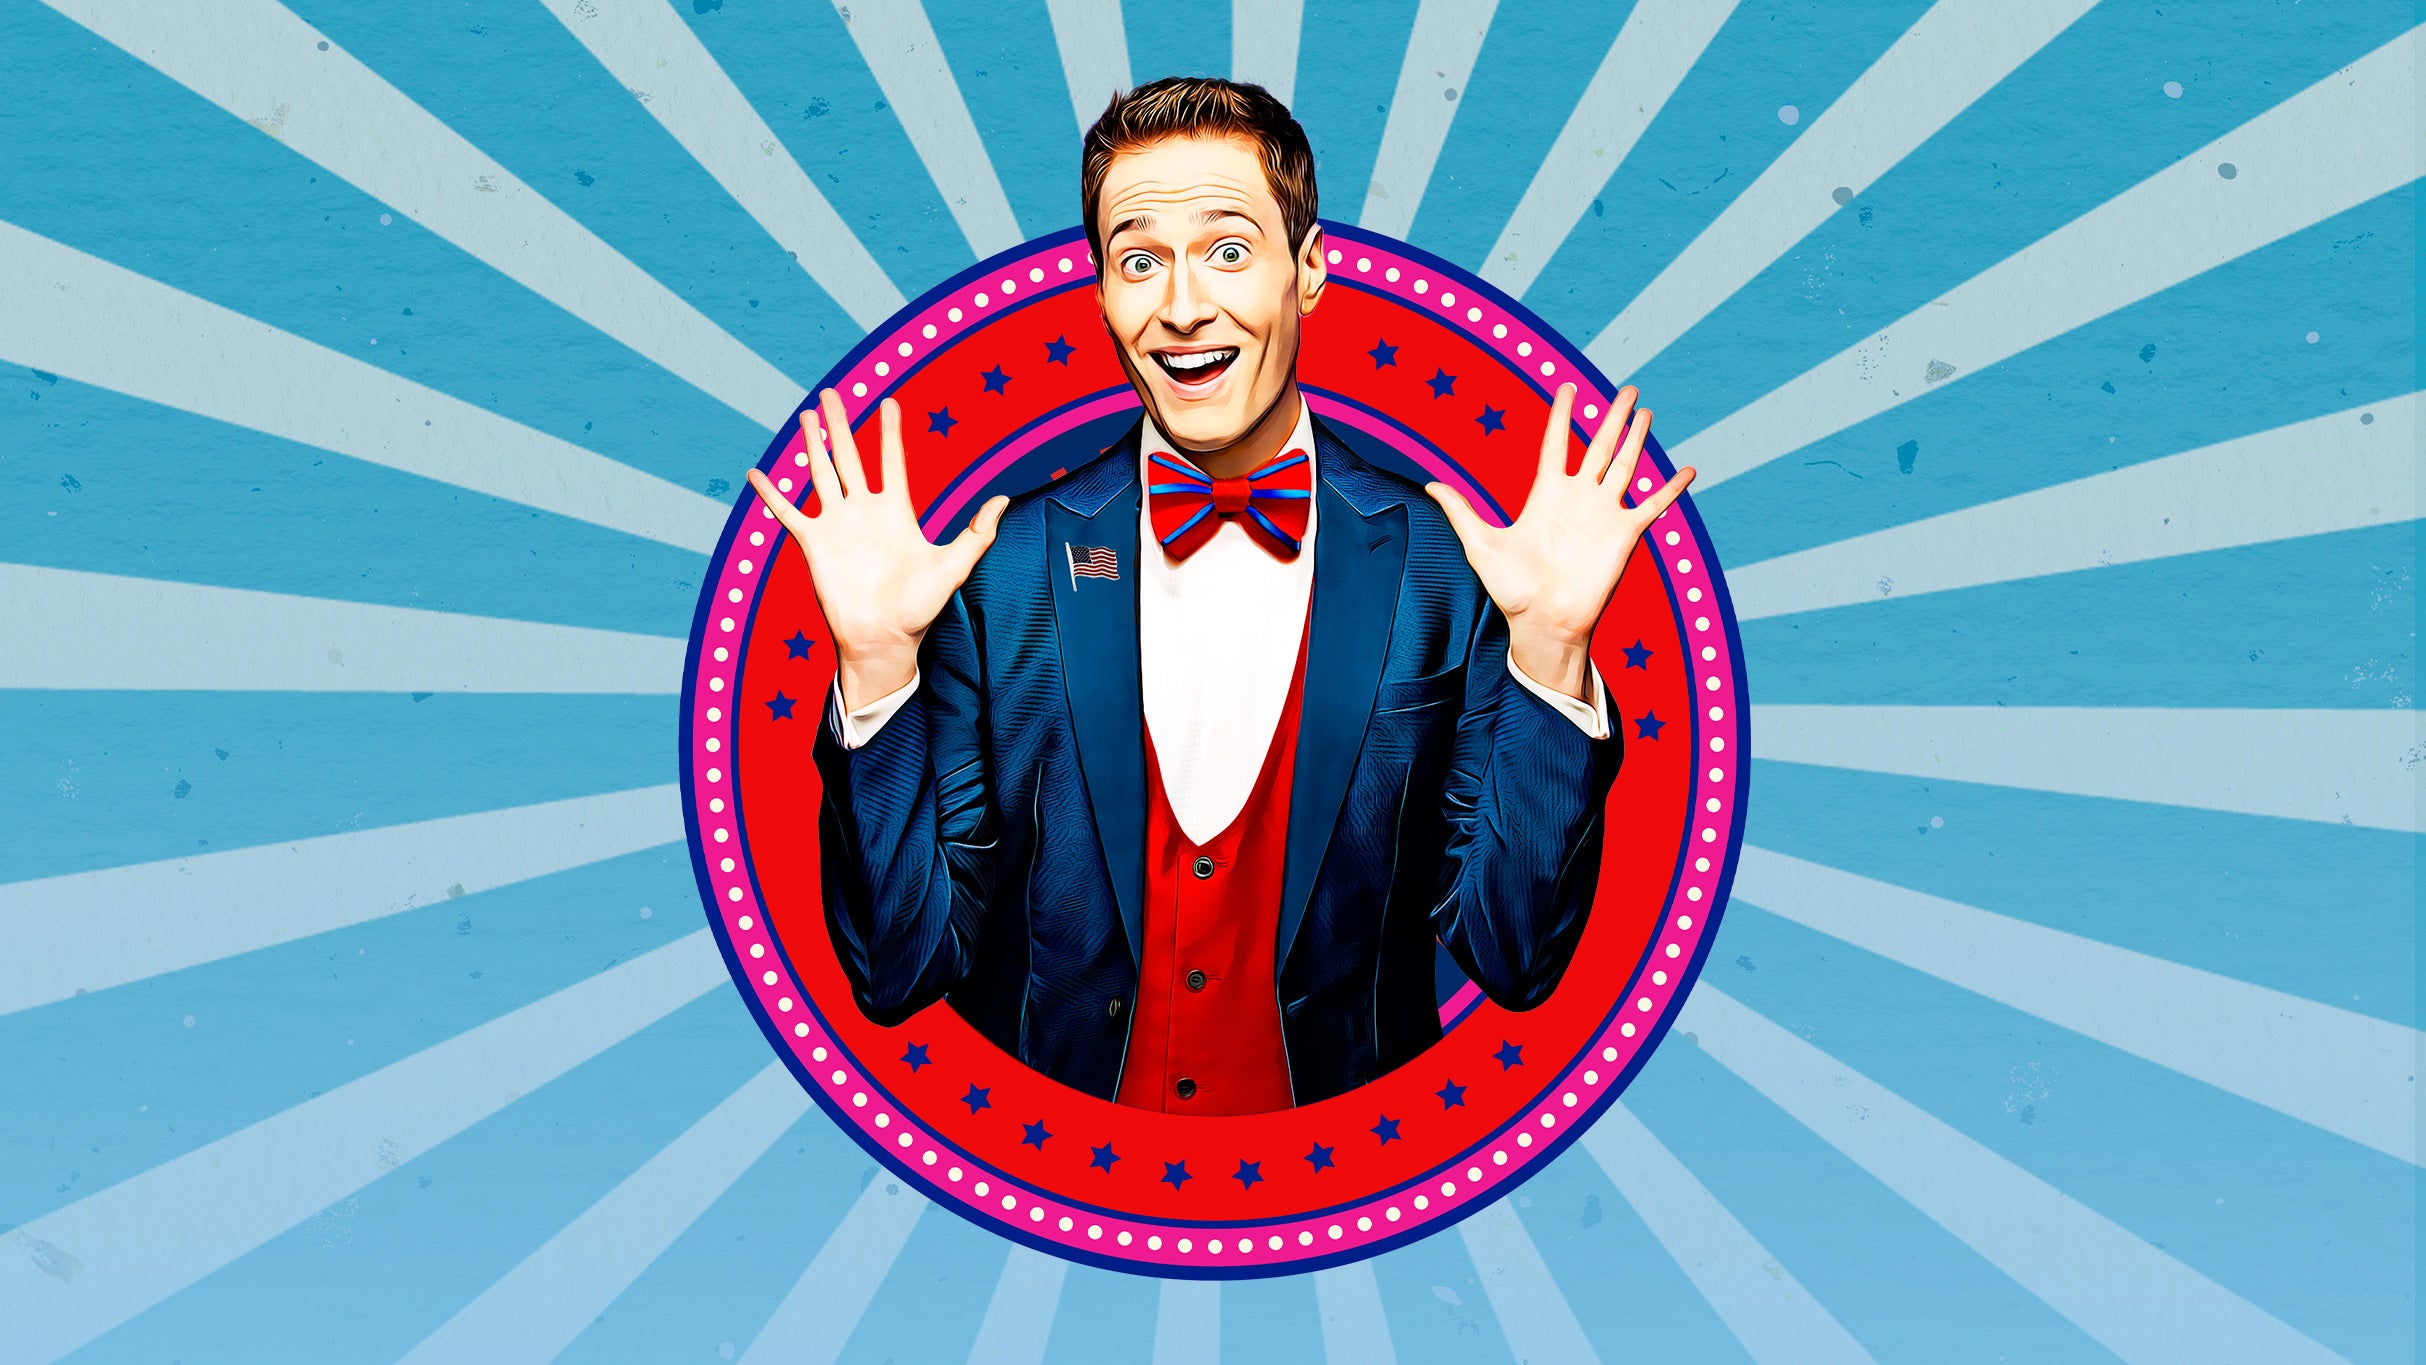 Randy Rainbow for President pre-sale code for show tickets in Buffalo, NY (PAC at Buffalo State College)